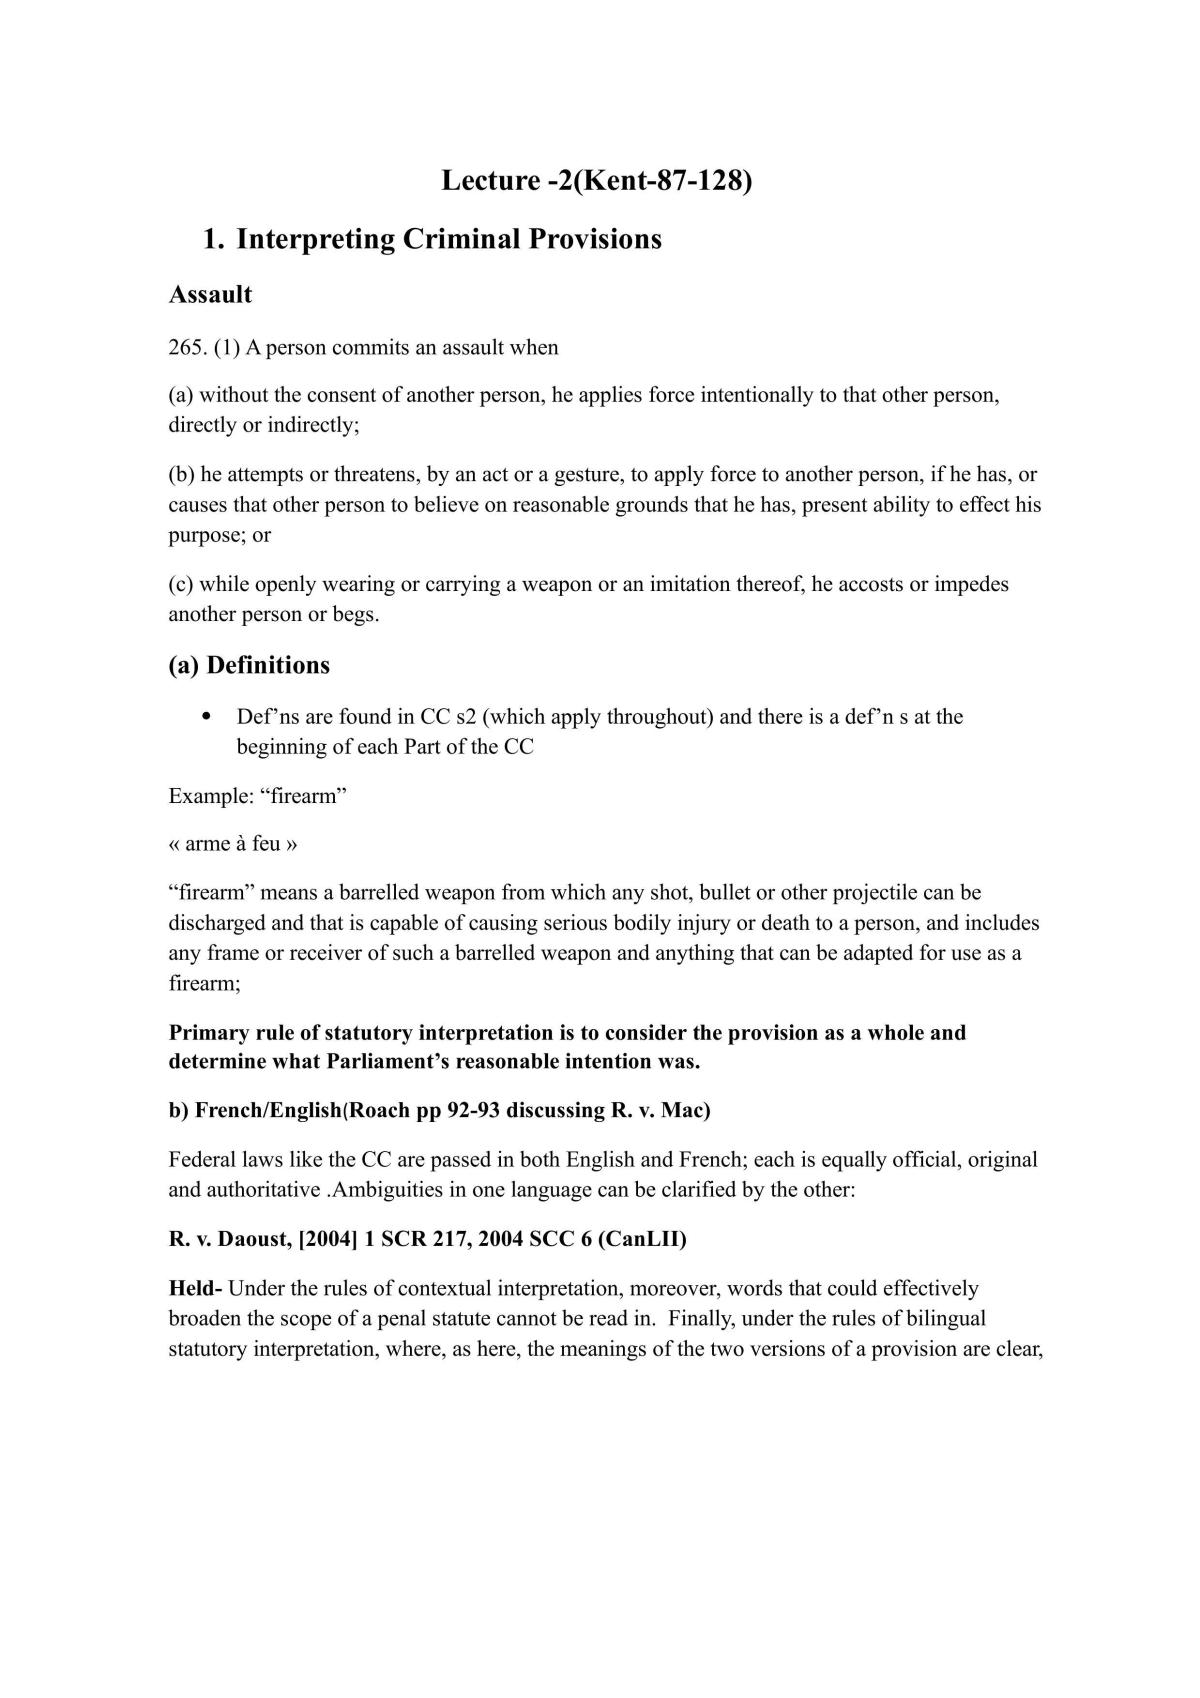 Canadian Criminal Law Course Notes - Page 1